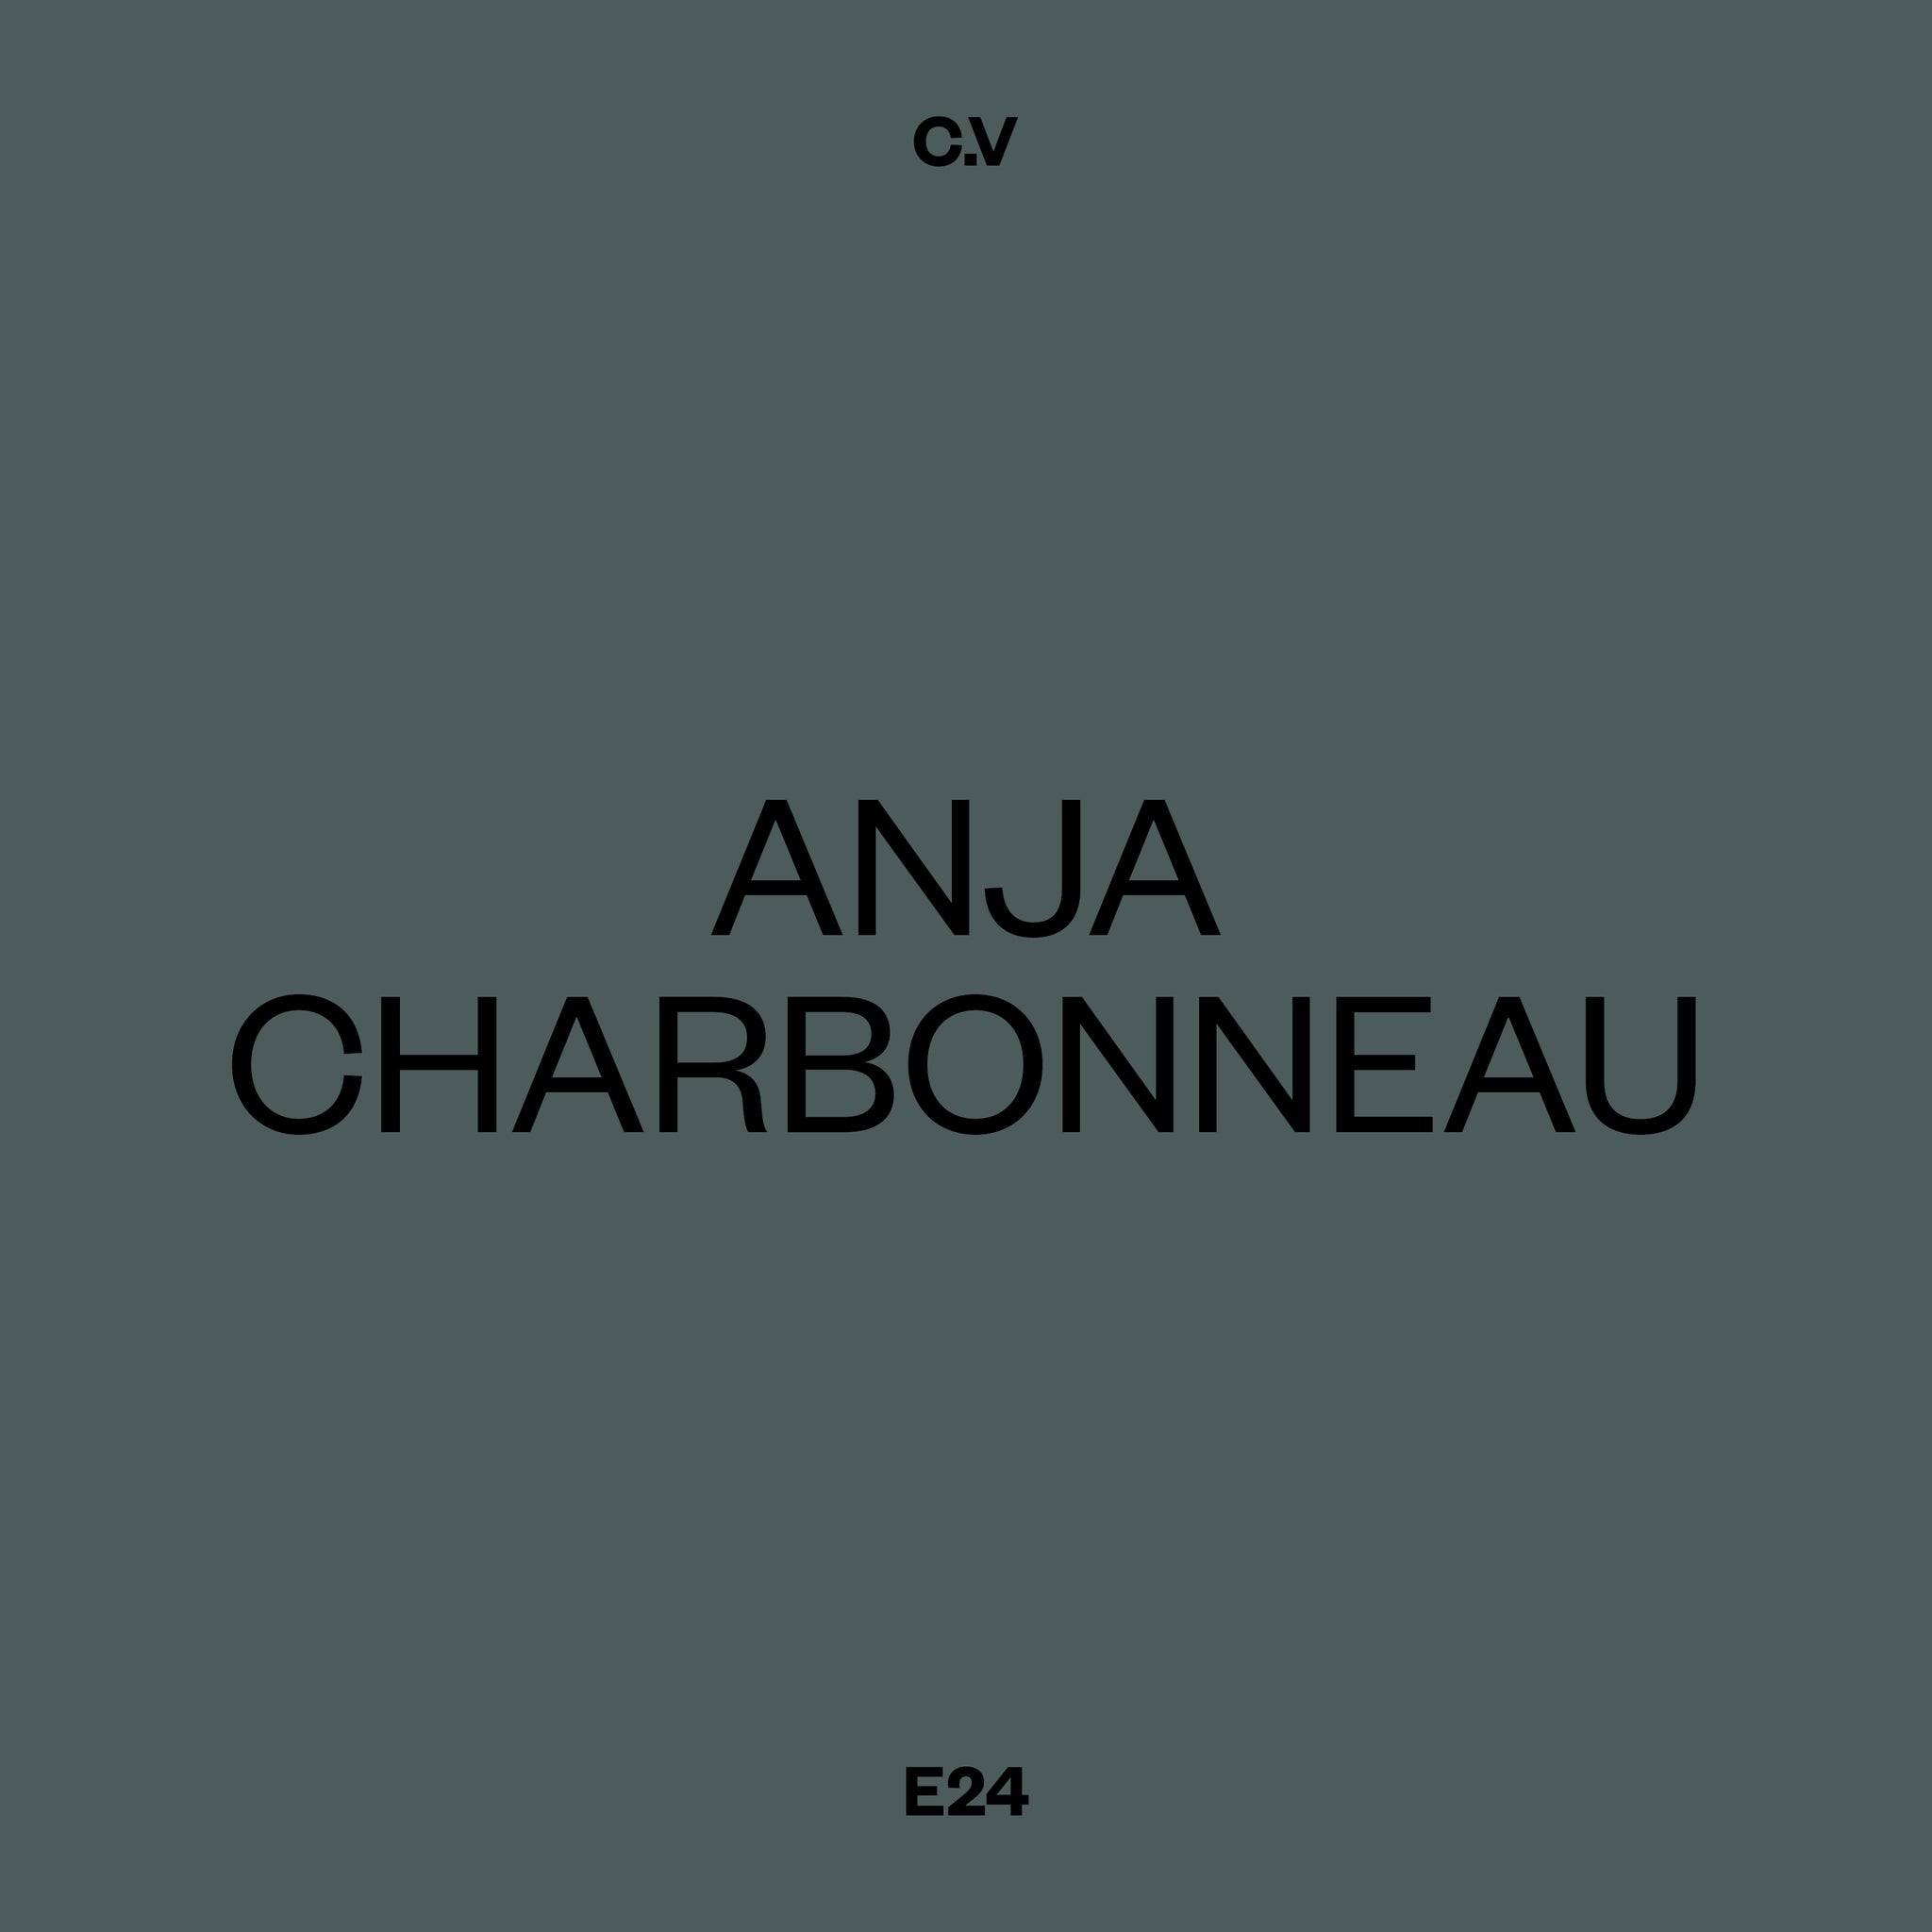 How to Start a Magazine with Anja Charbonneau